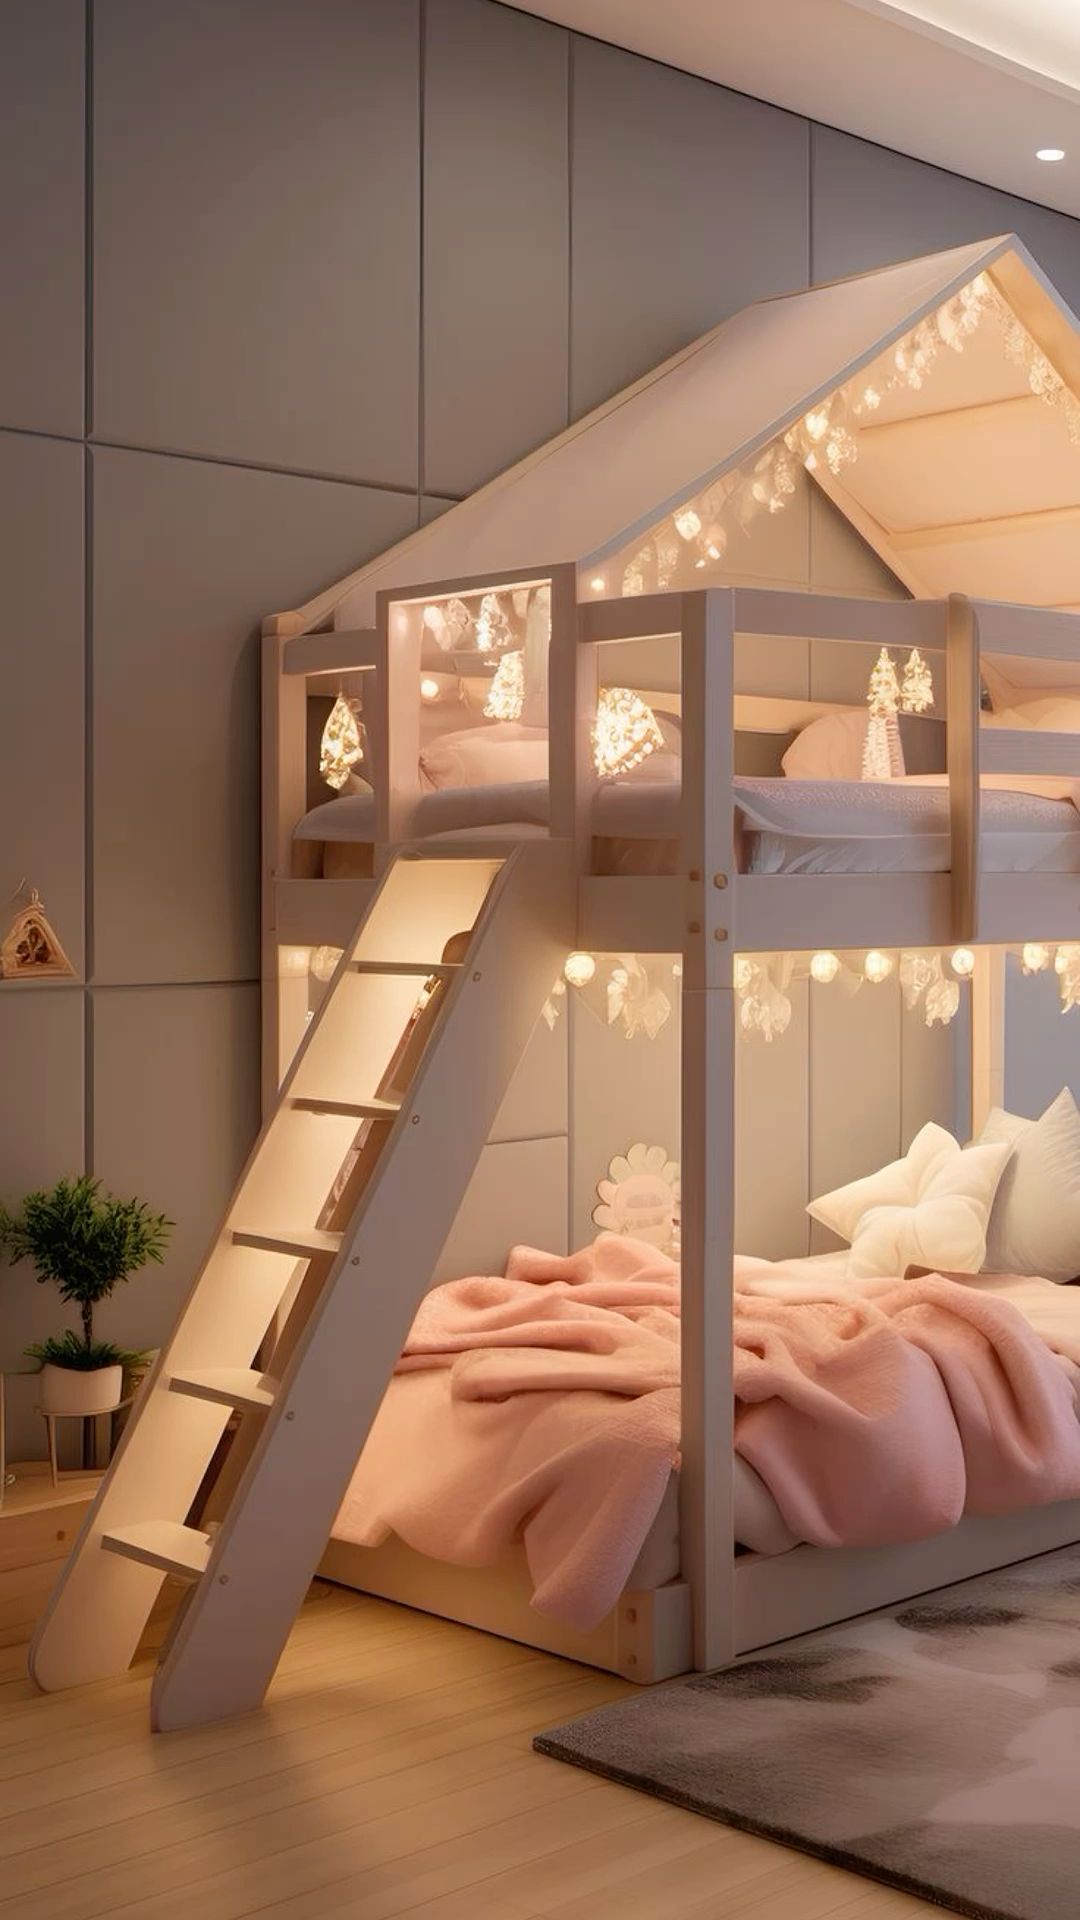 Double Bunk Beds Maximizing Space with Versatile Bunk Beds for Two